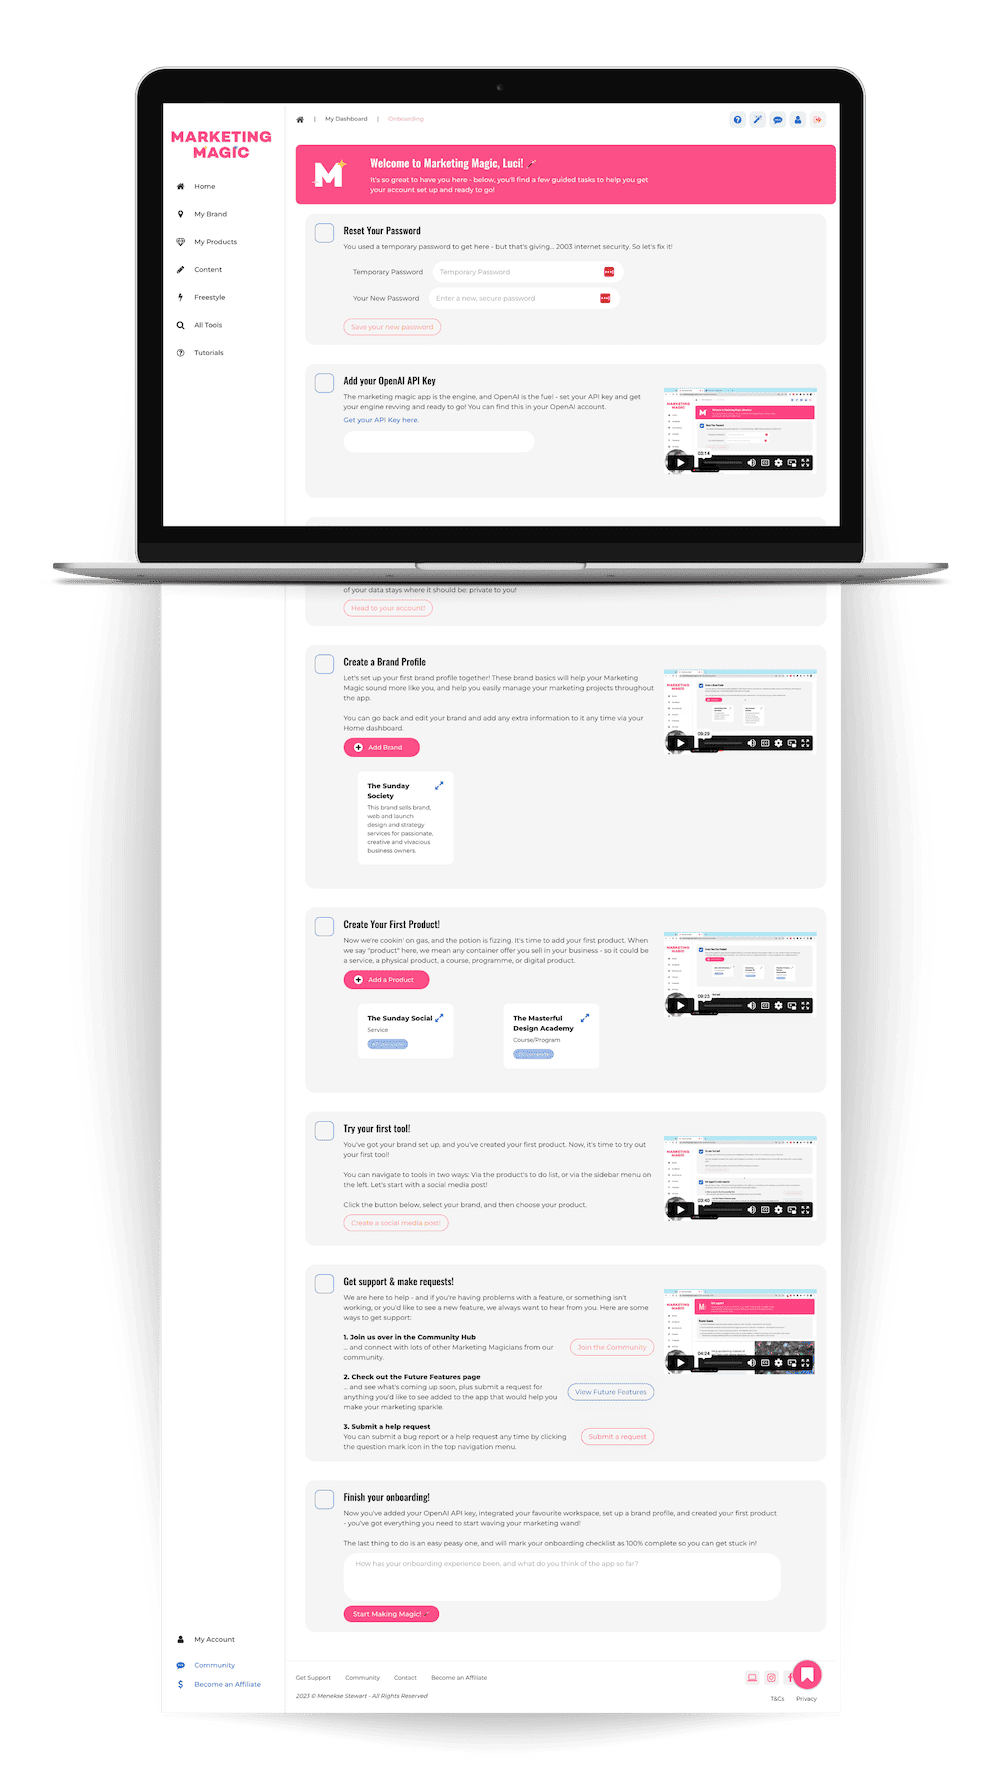 A mockup of the Marketing Magic ai marketing tool on laptop demonstrating the easy onboarding dashboard.